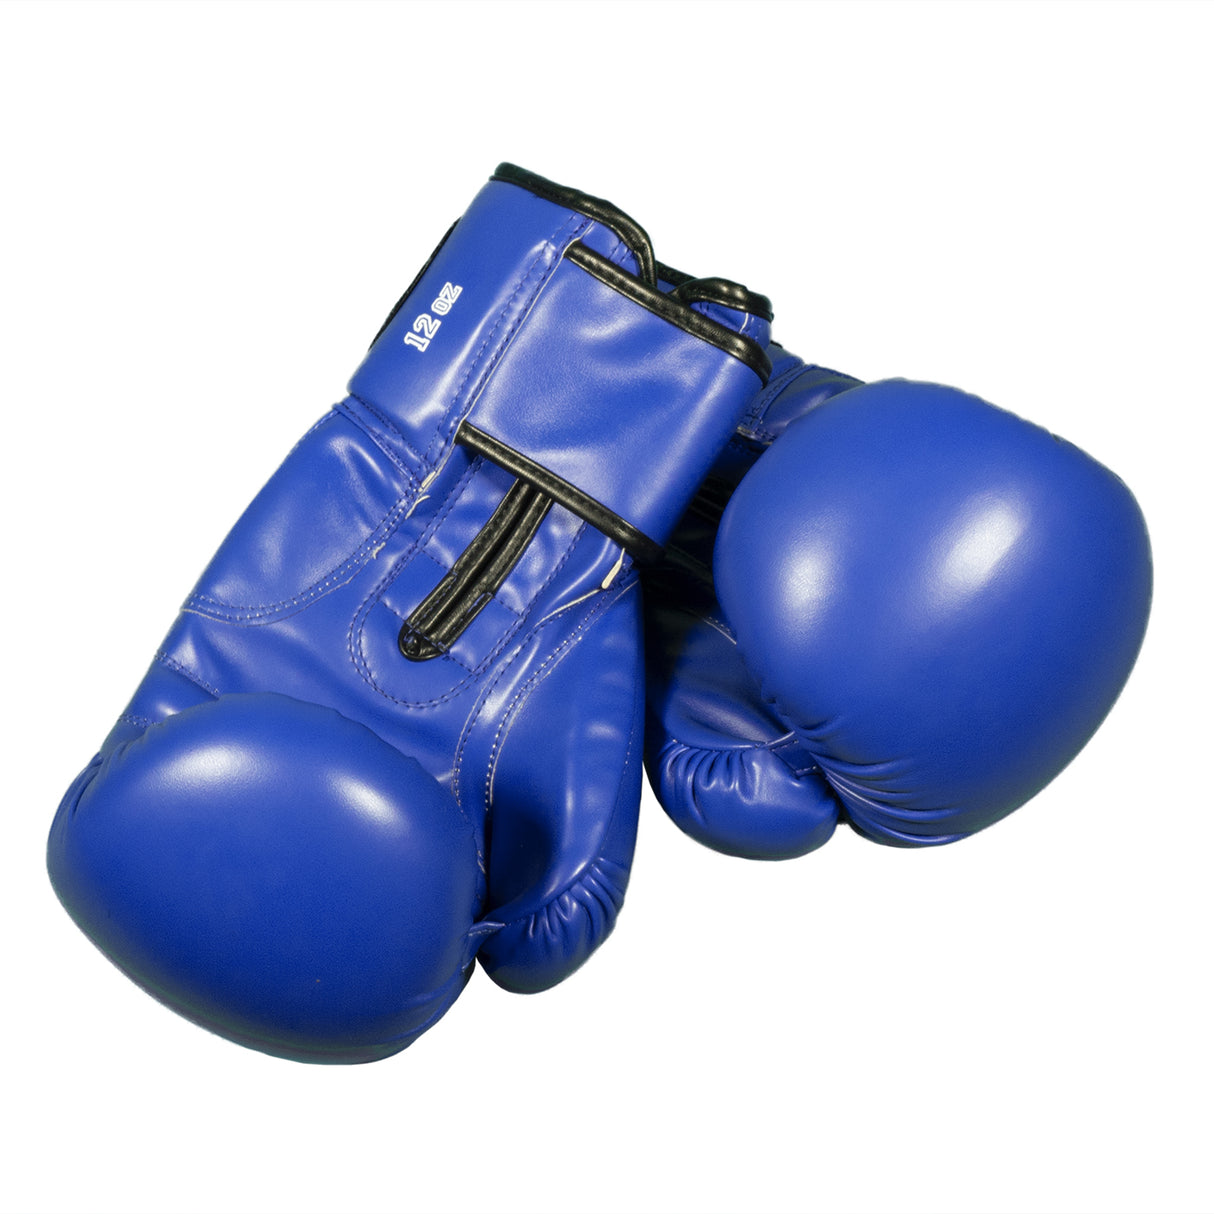 DS Sparring Club Training Boxing Gloves 8oz